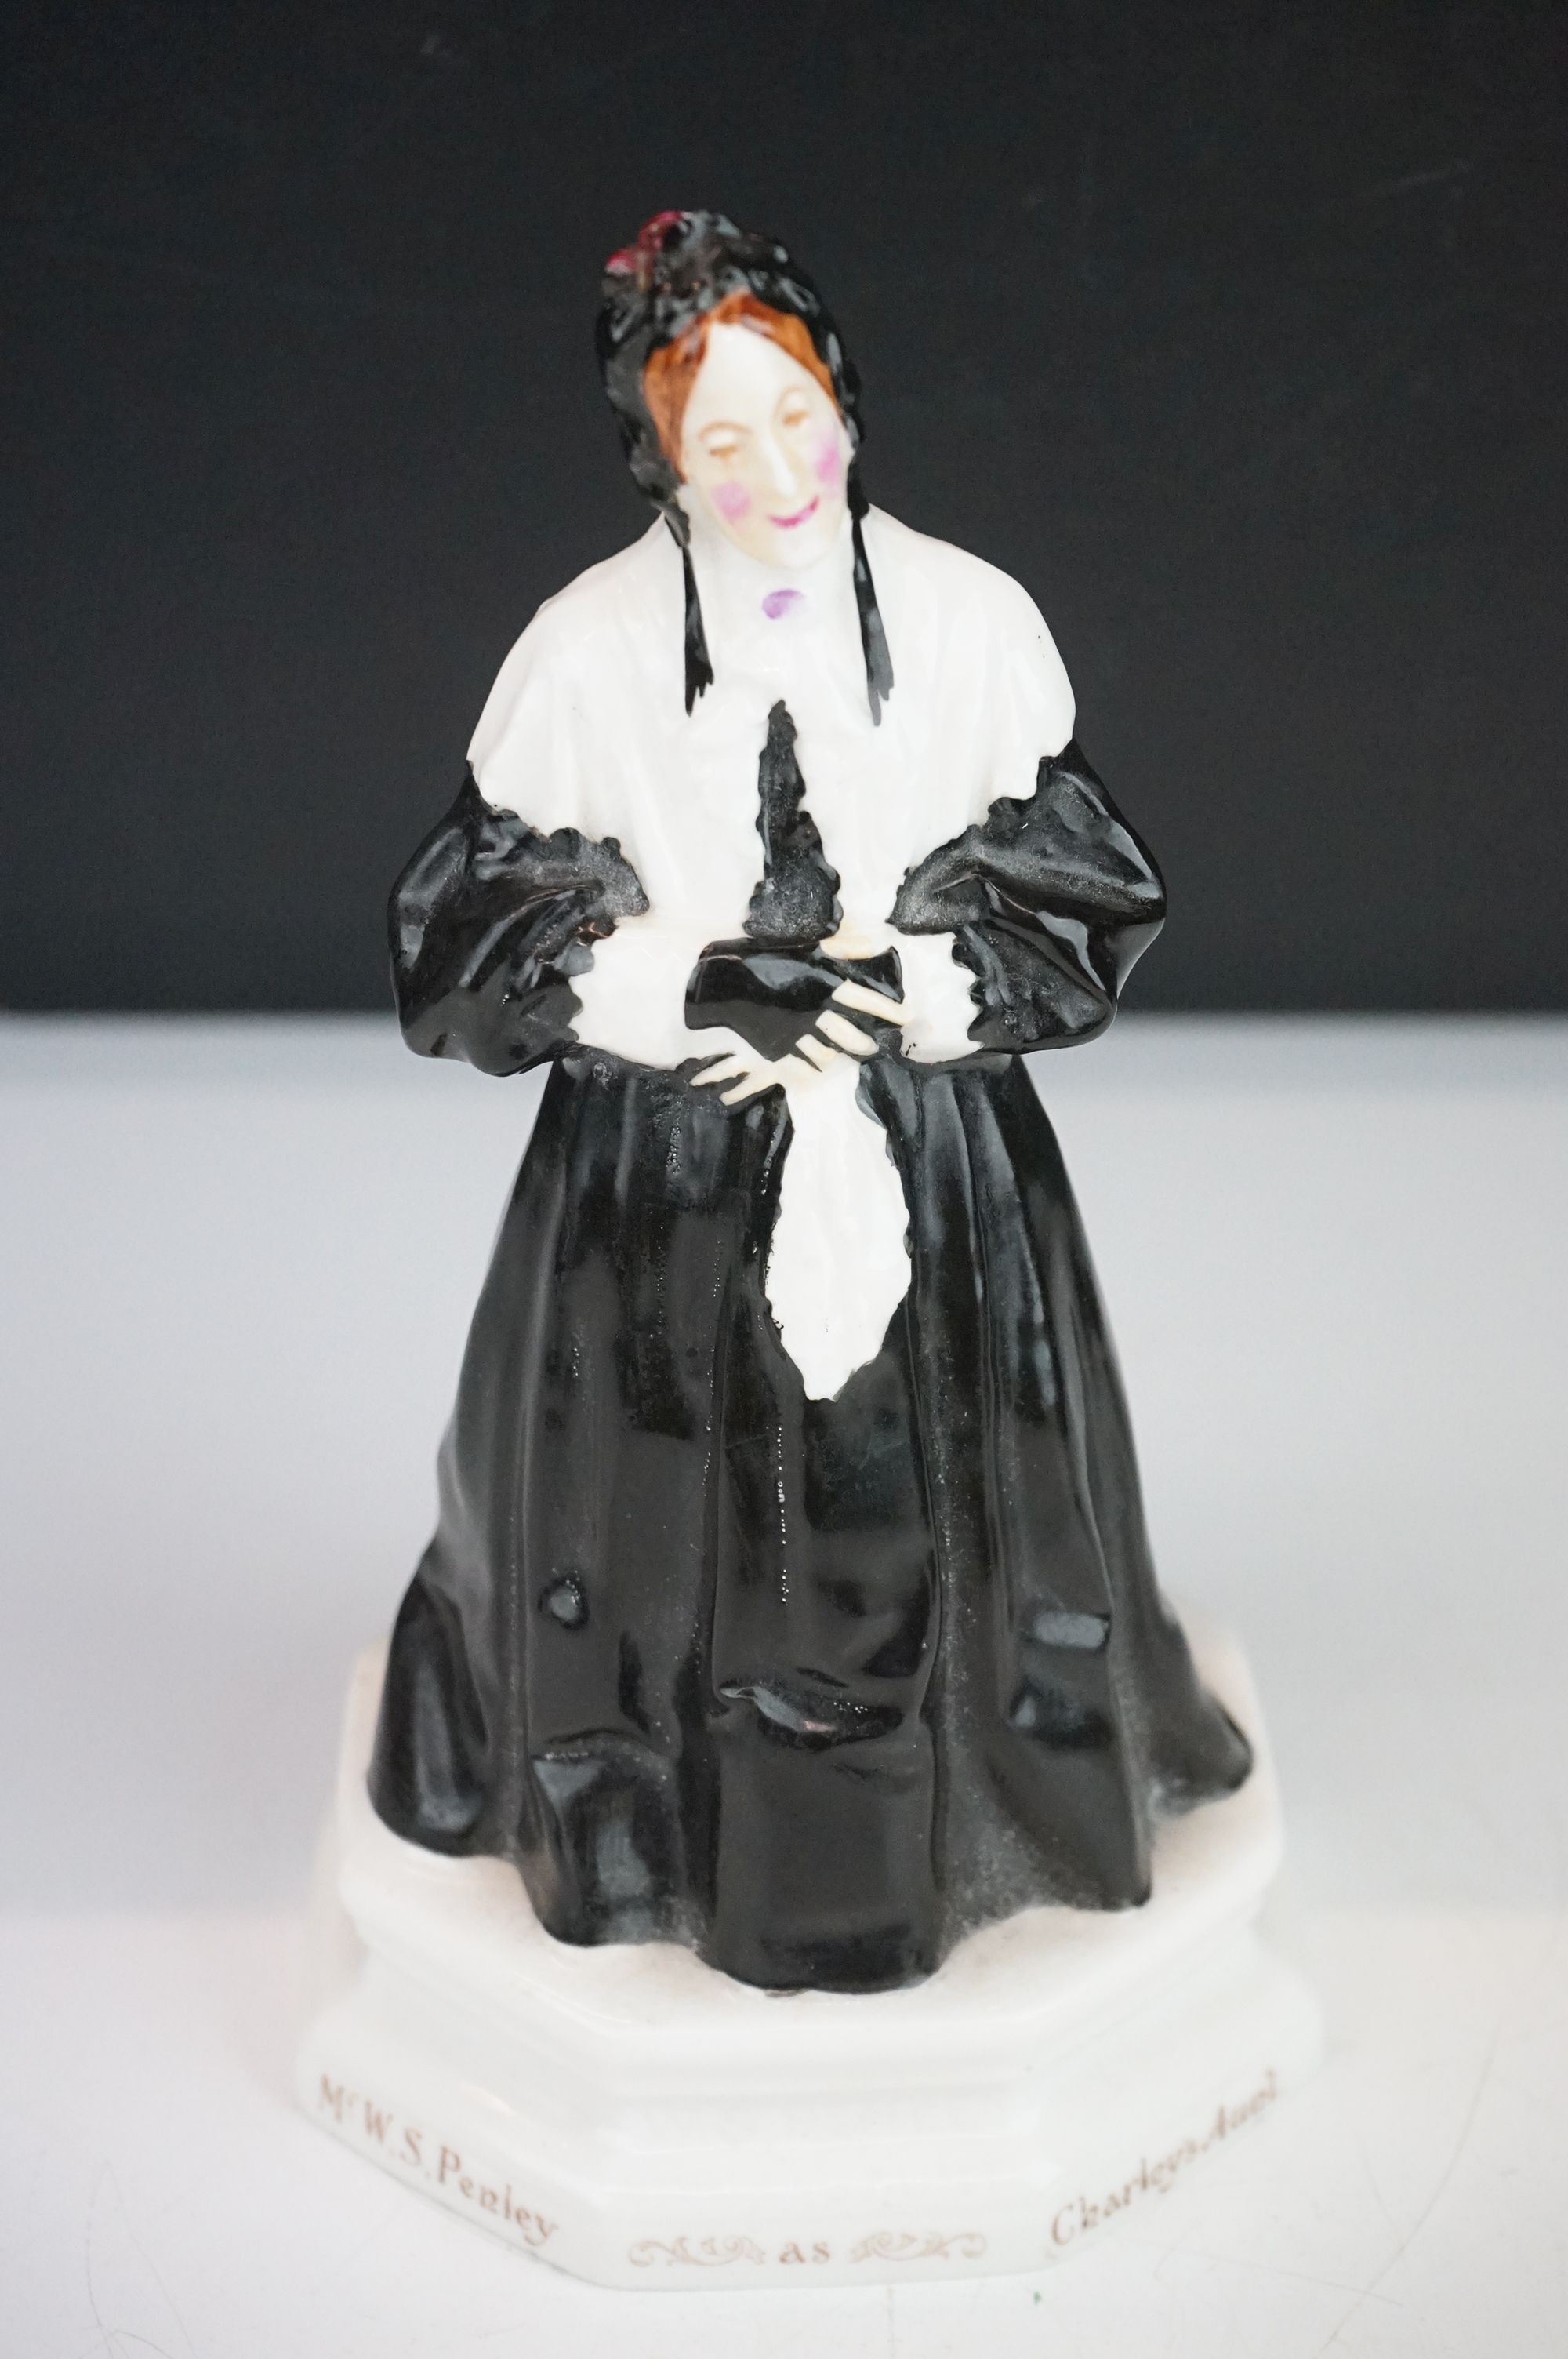 Early Royal Doulton ceramic figurine ' Mr W S Penley as Charleys Aunt ' in the form of a Victorian - Image 2 of 10